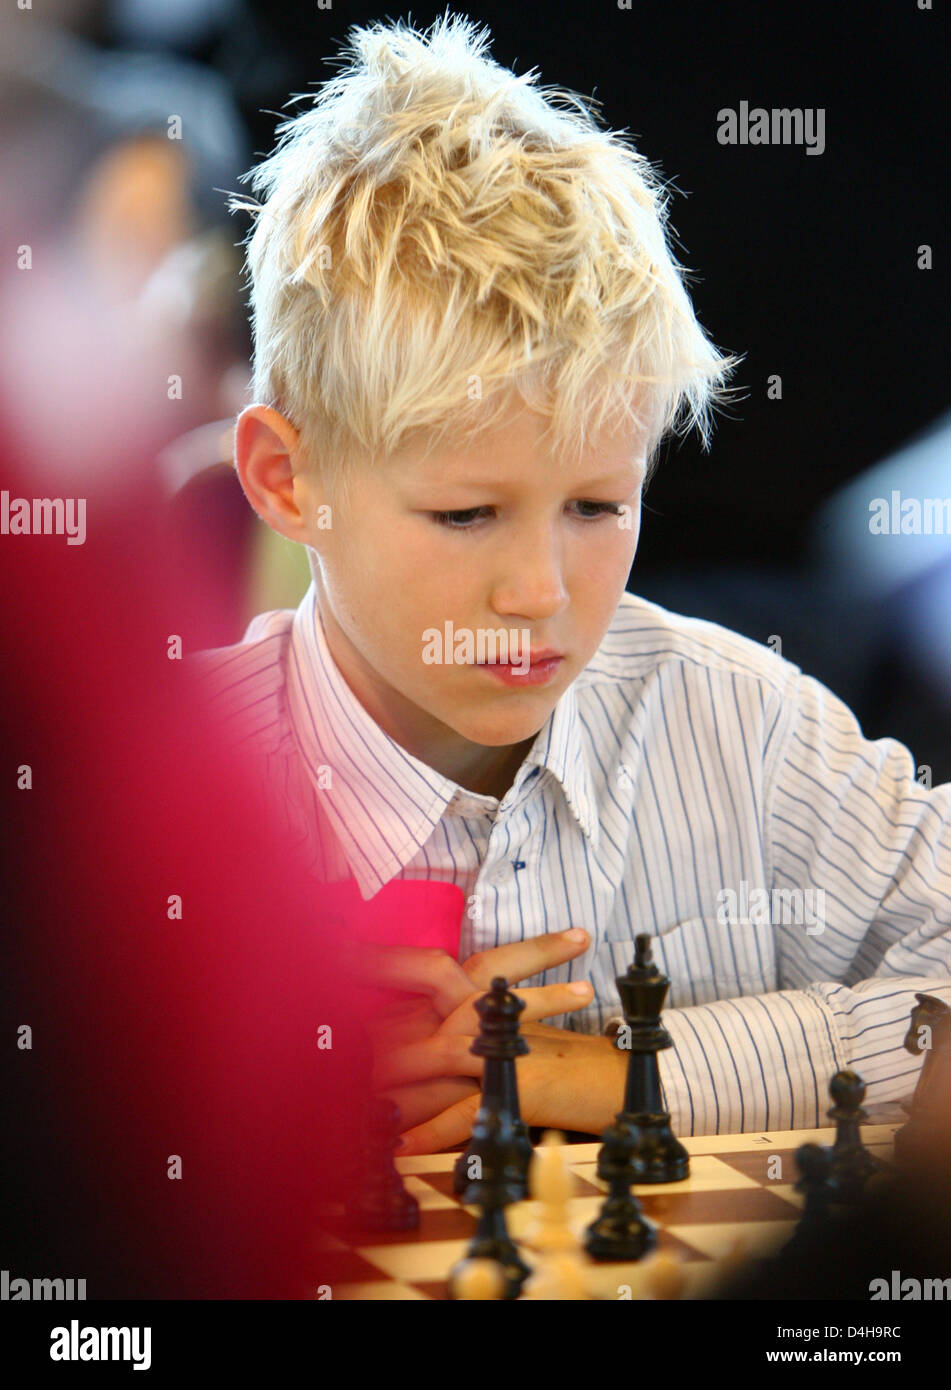 Eight-year-old Tim Wagner concentrates on his chess game during the 2008  Chess Olympiad in Dresden, Germany, 15 November 2008. His is one of the  face represented during the advertisement campaign for the,